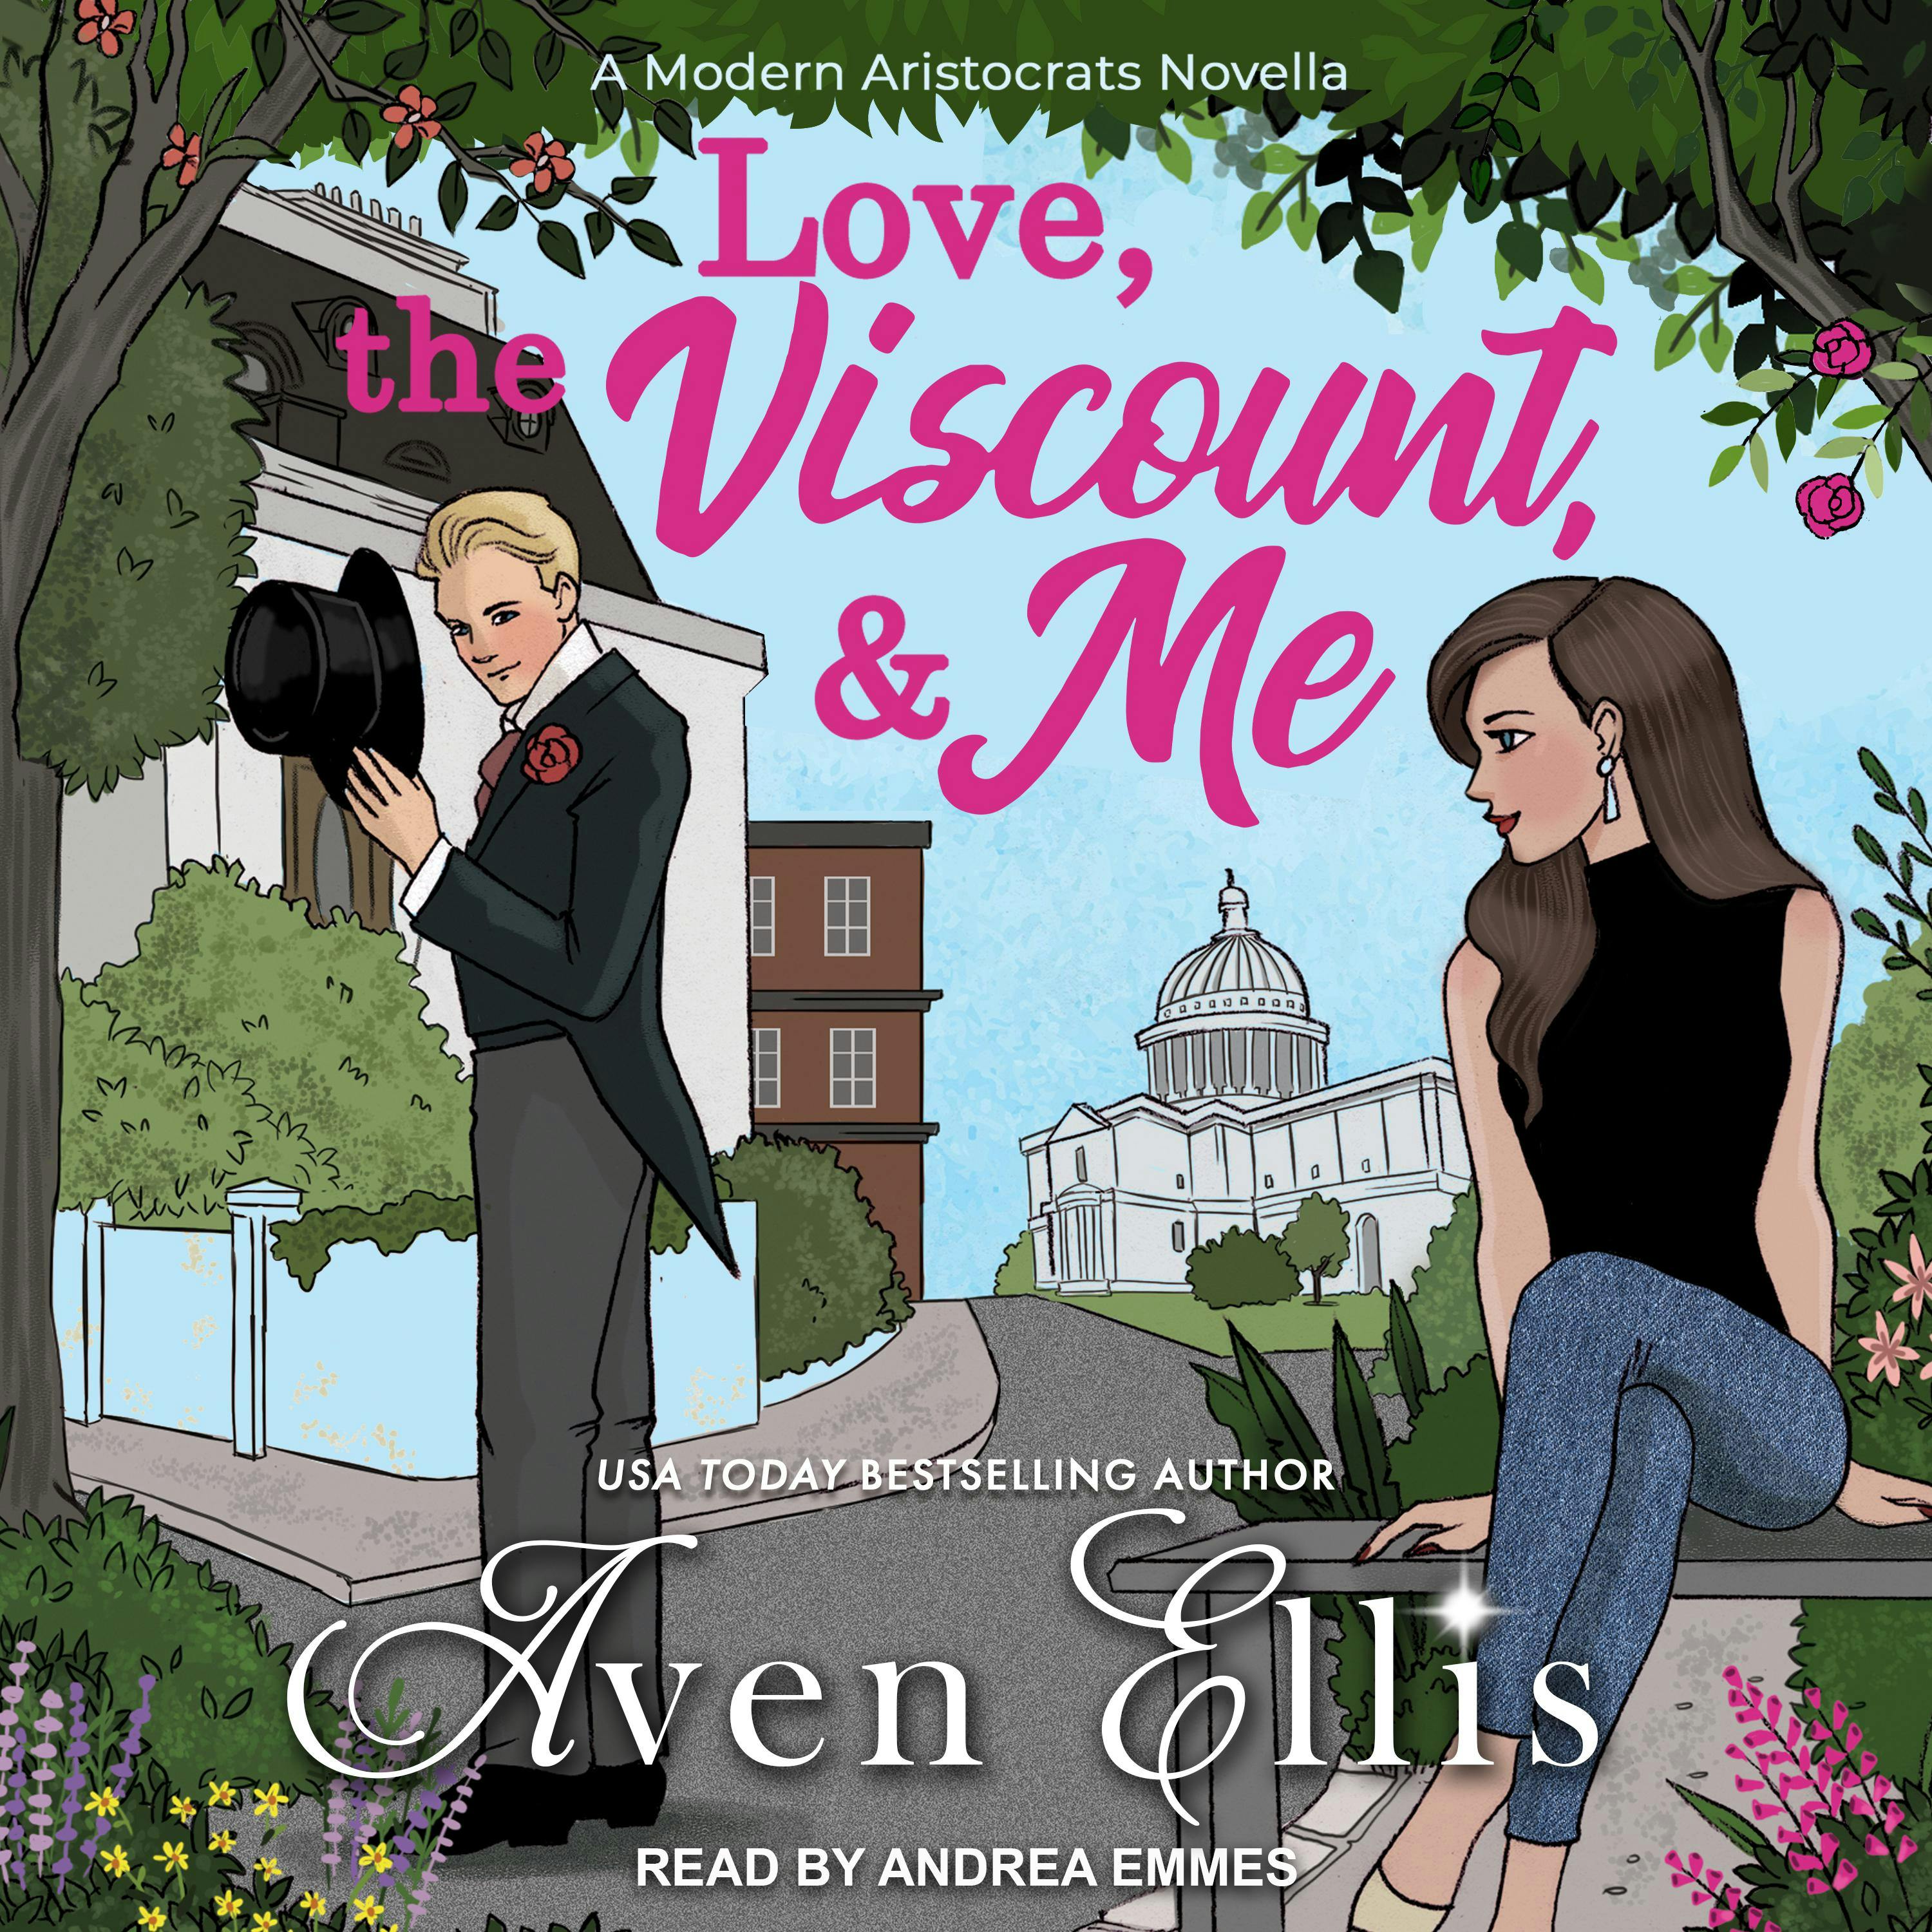 Love, the Viscount, & Me - undefined